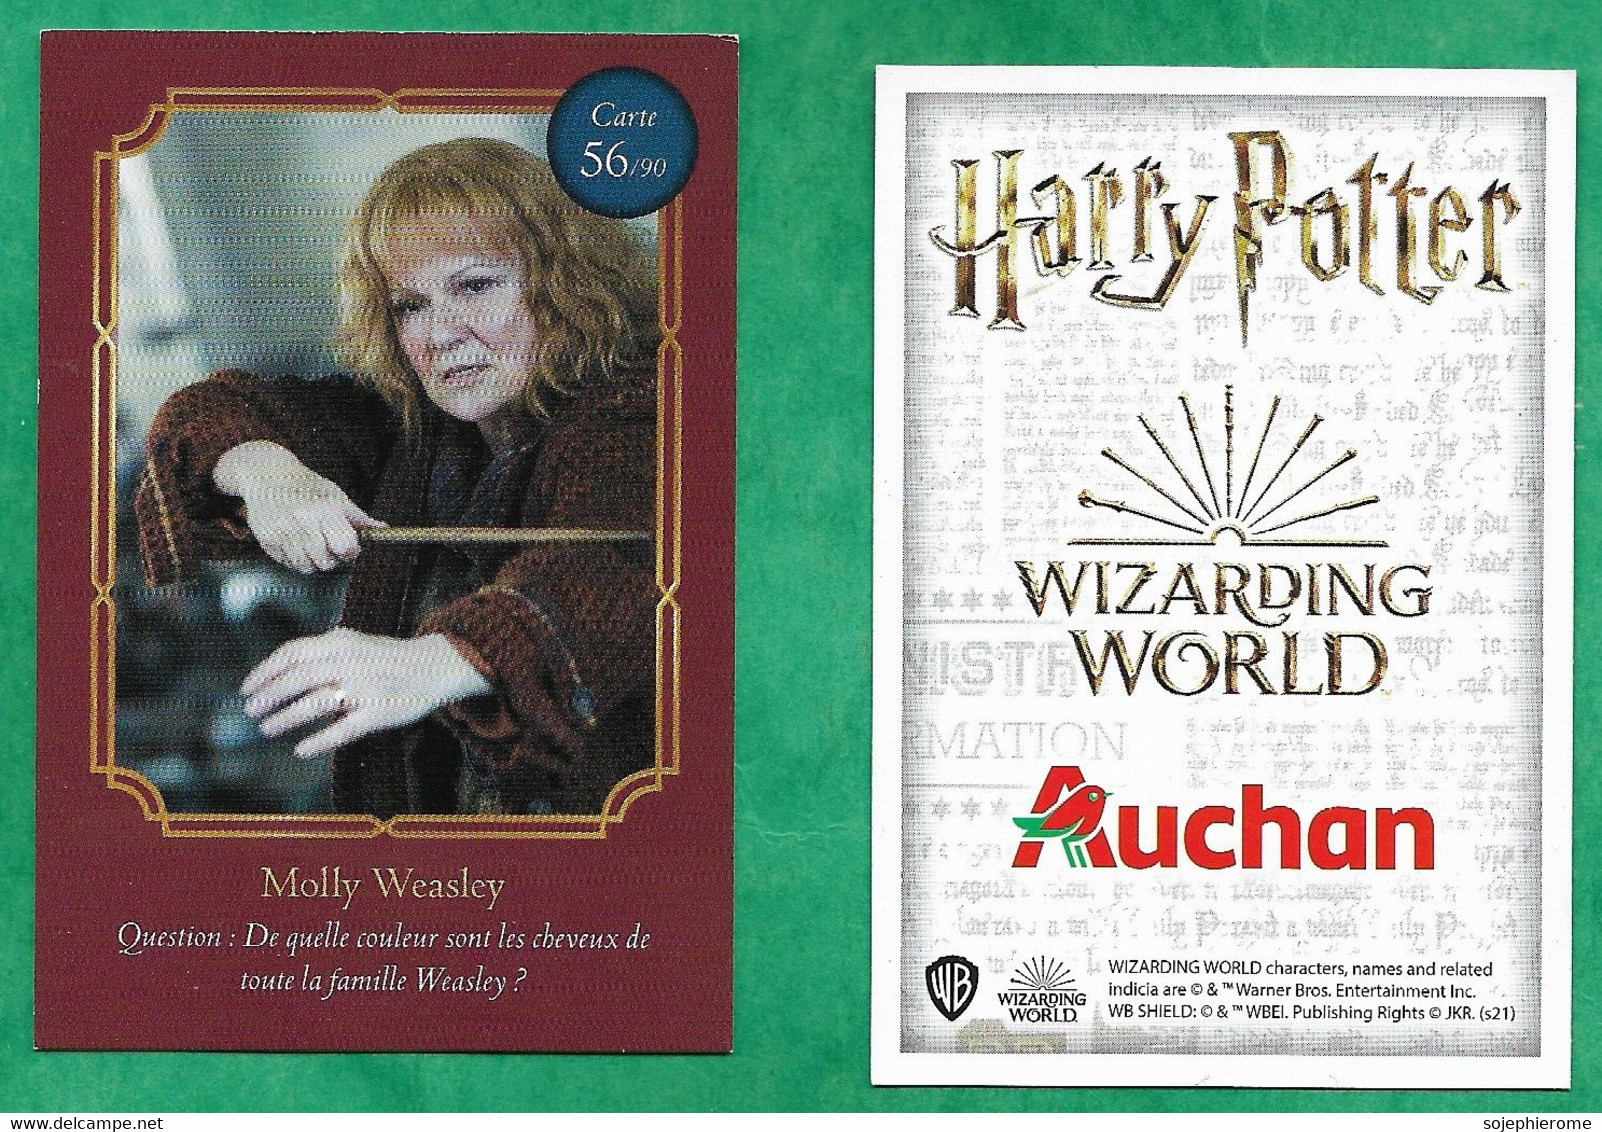 Auchan "Harry Potter Wizarding World" Molly Weasley 56/90 - 2scans - Harry Potter